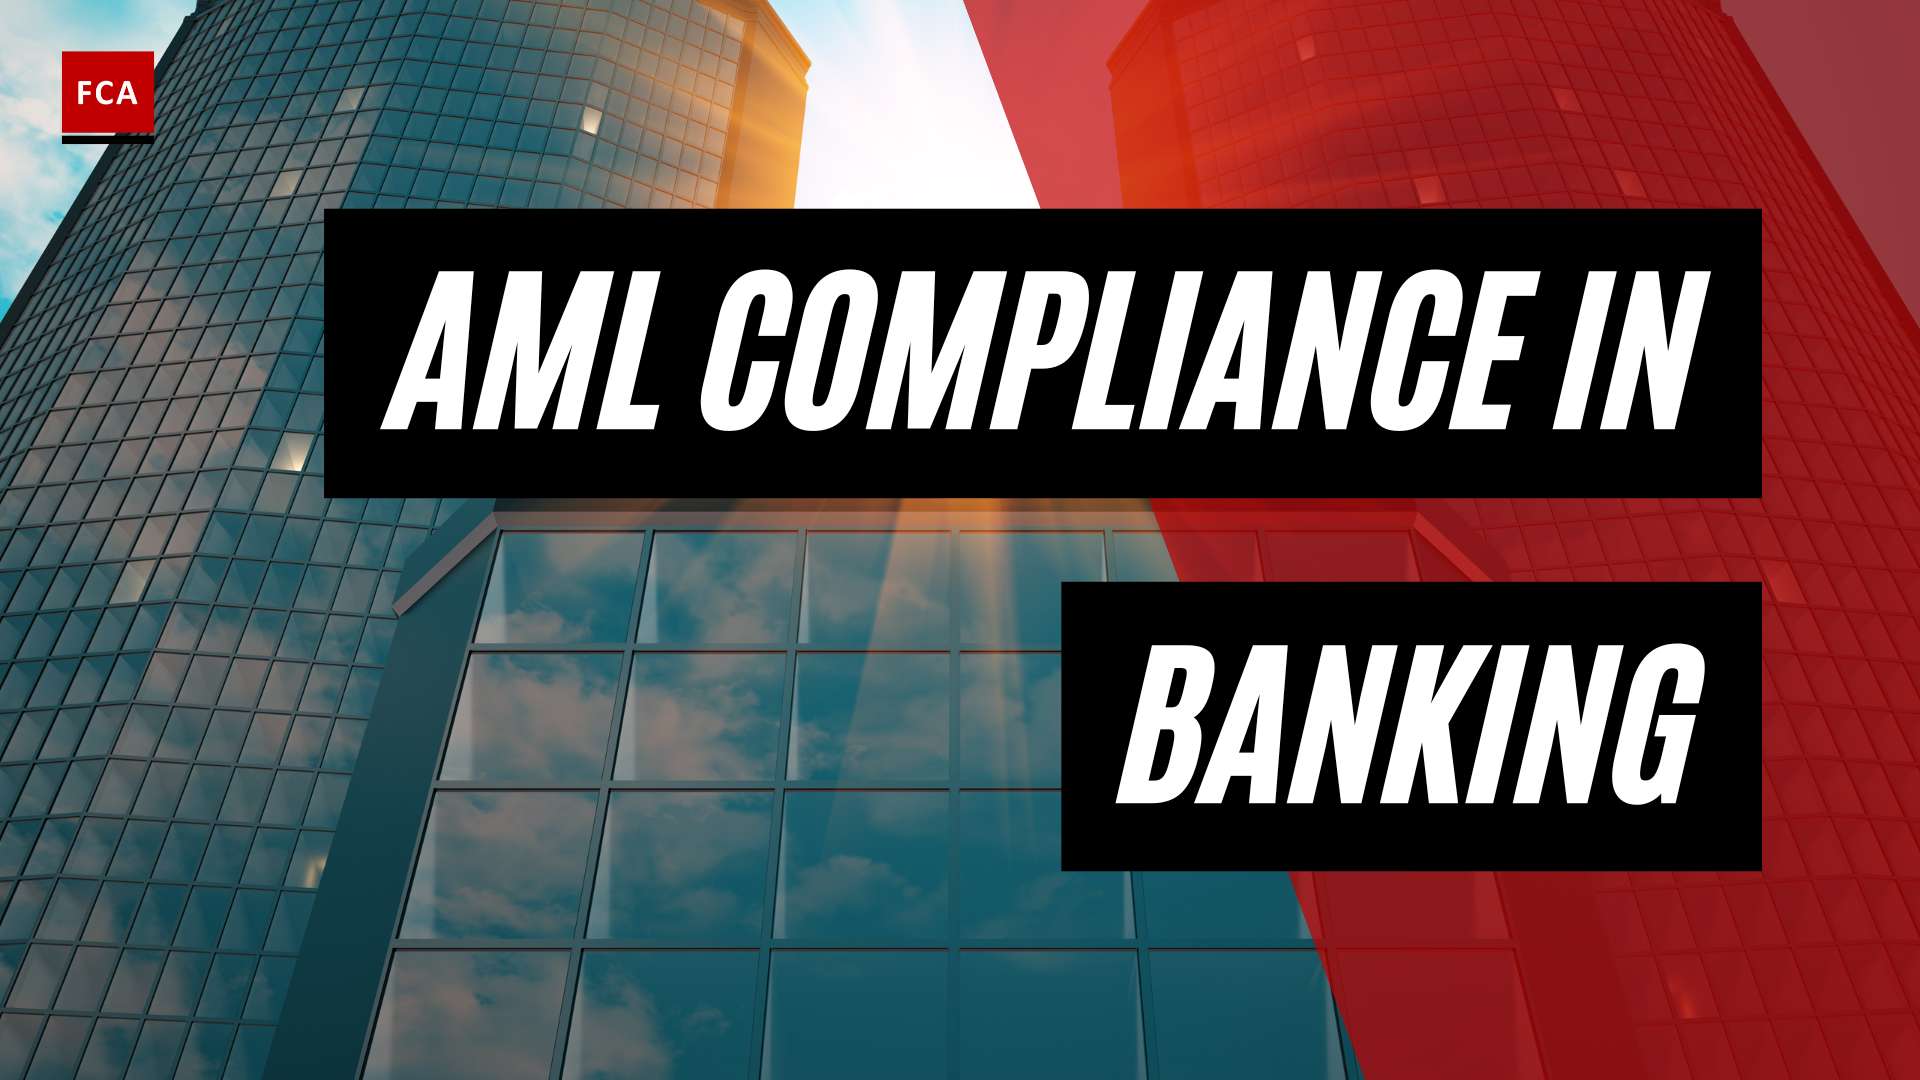 Strengthening Financial Integrity: Aml Compliance In The Banking Industry